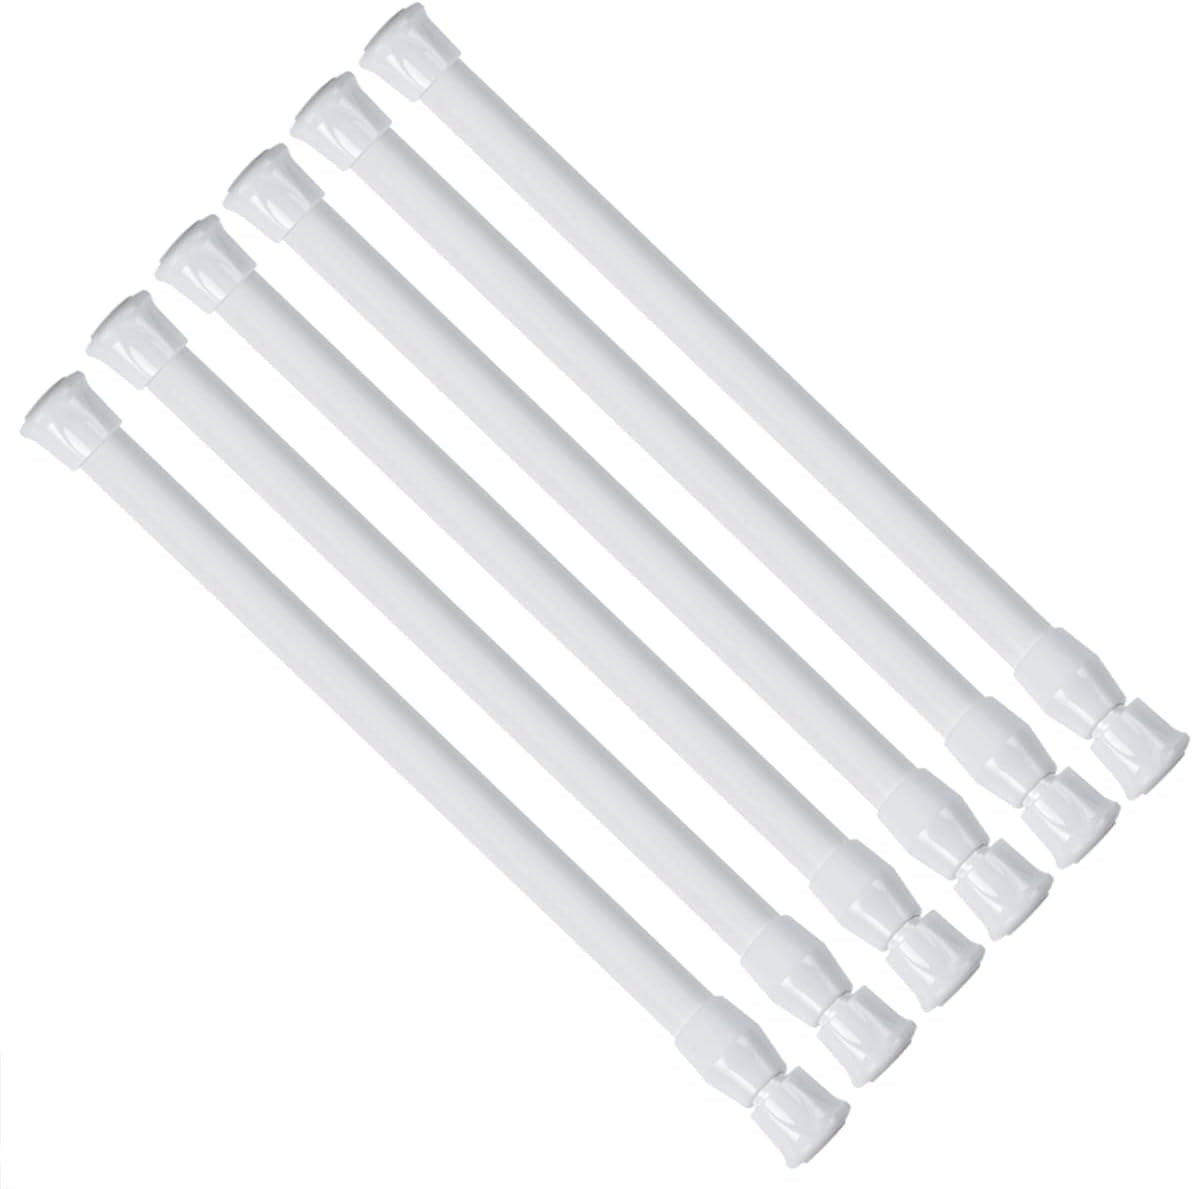 Goodtou 5 Pack Curtain Rods No Drilling,17.5 to 28 Inch(Approx.) Spring Tension Rods for Windows,Small Curtain Rods,Tension Curtain Rod,Adjustable Curtain Rod,Window Tension Rod,White